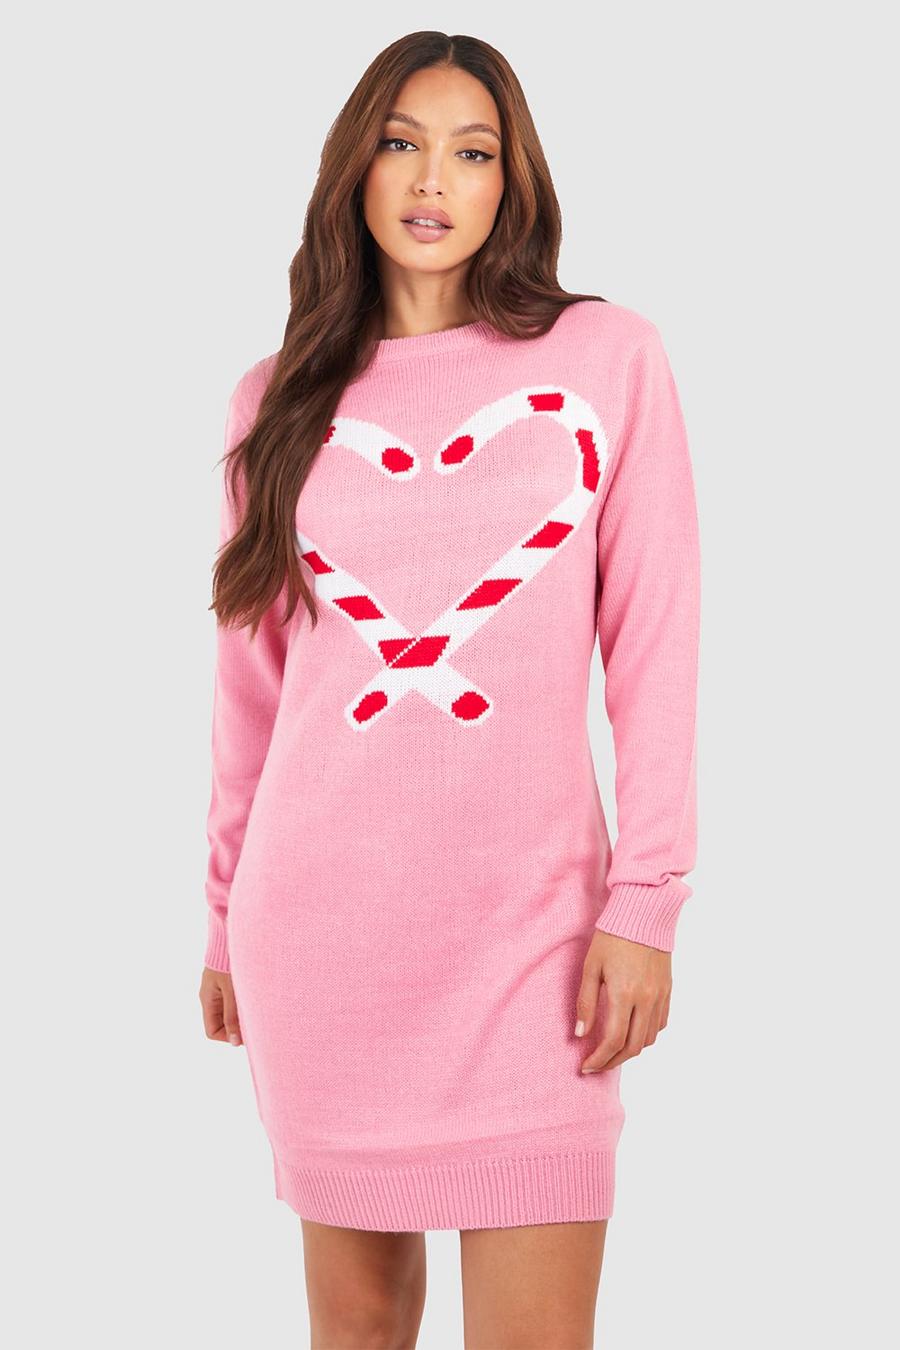 Pink Tall Candy Cane Christmas Sweater Dress